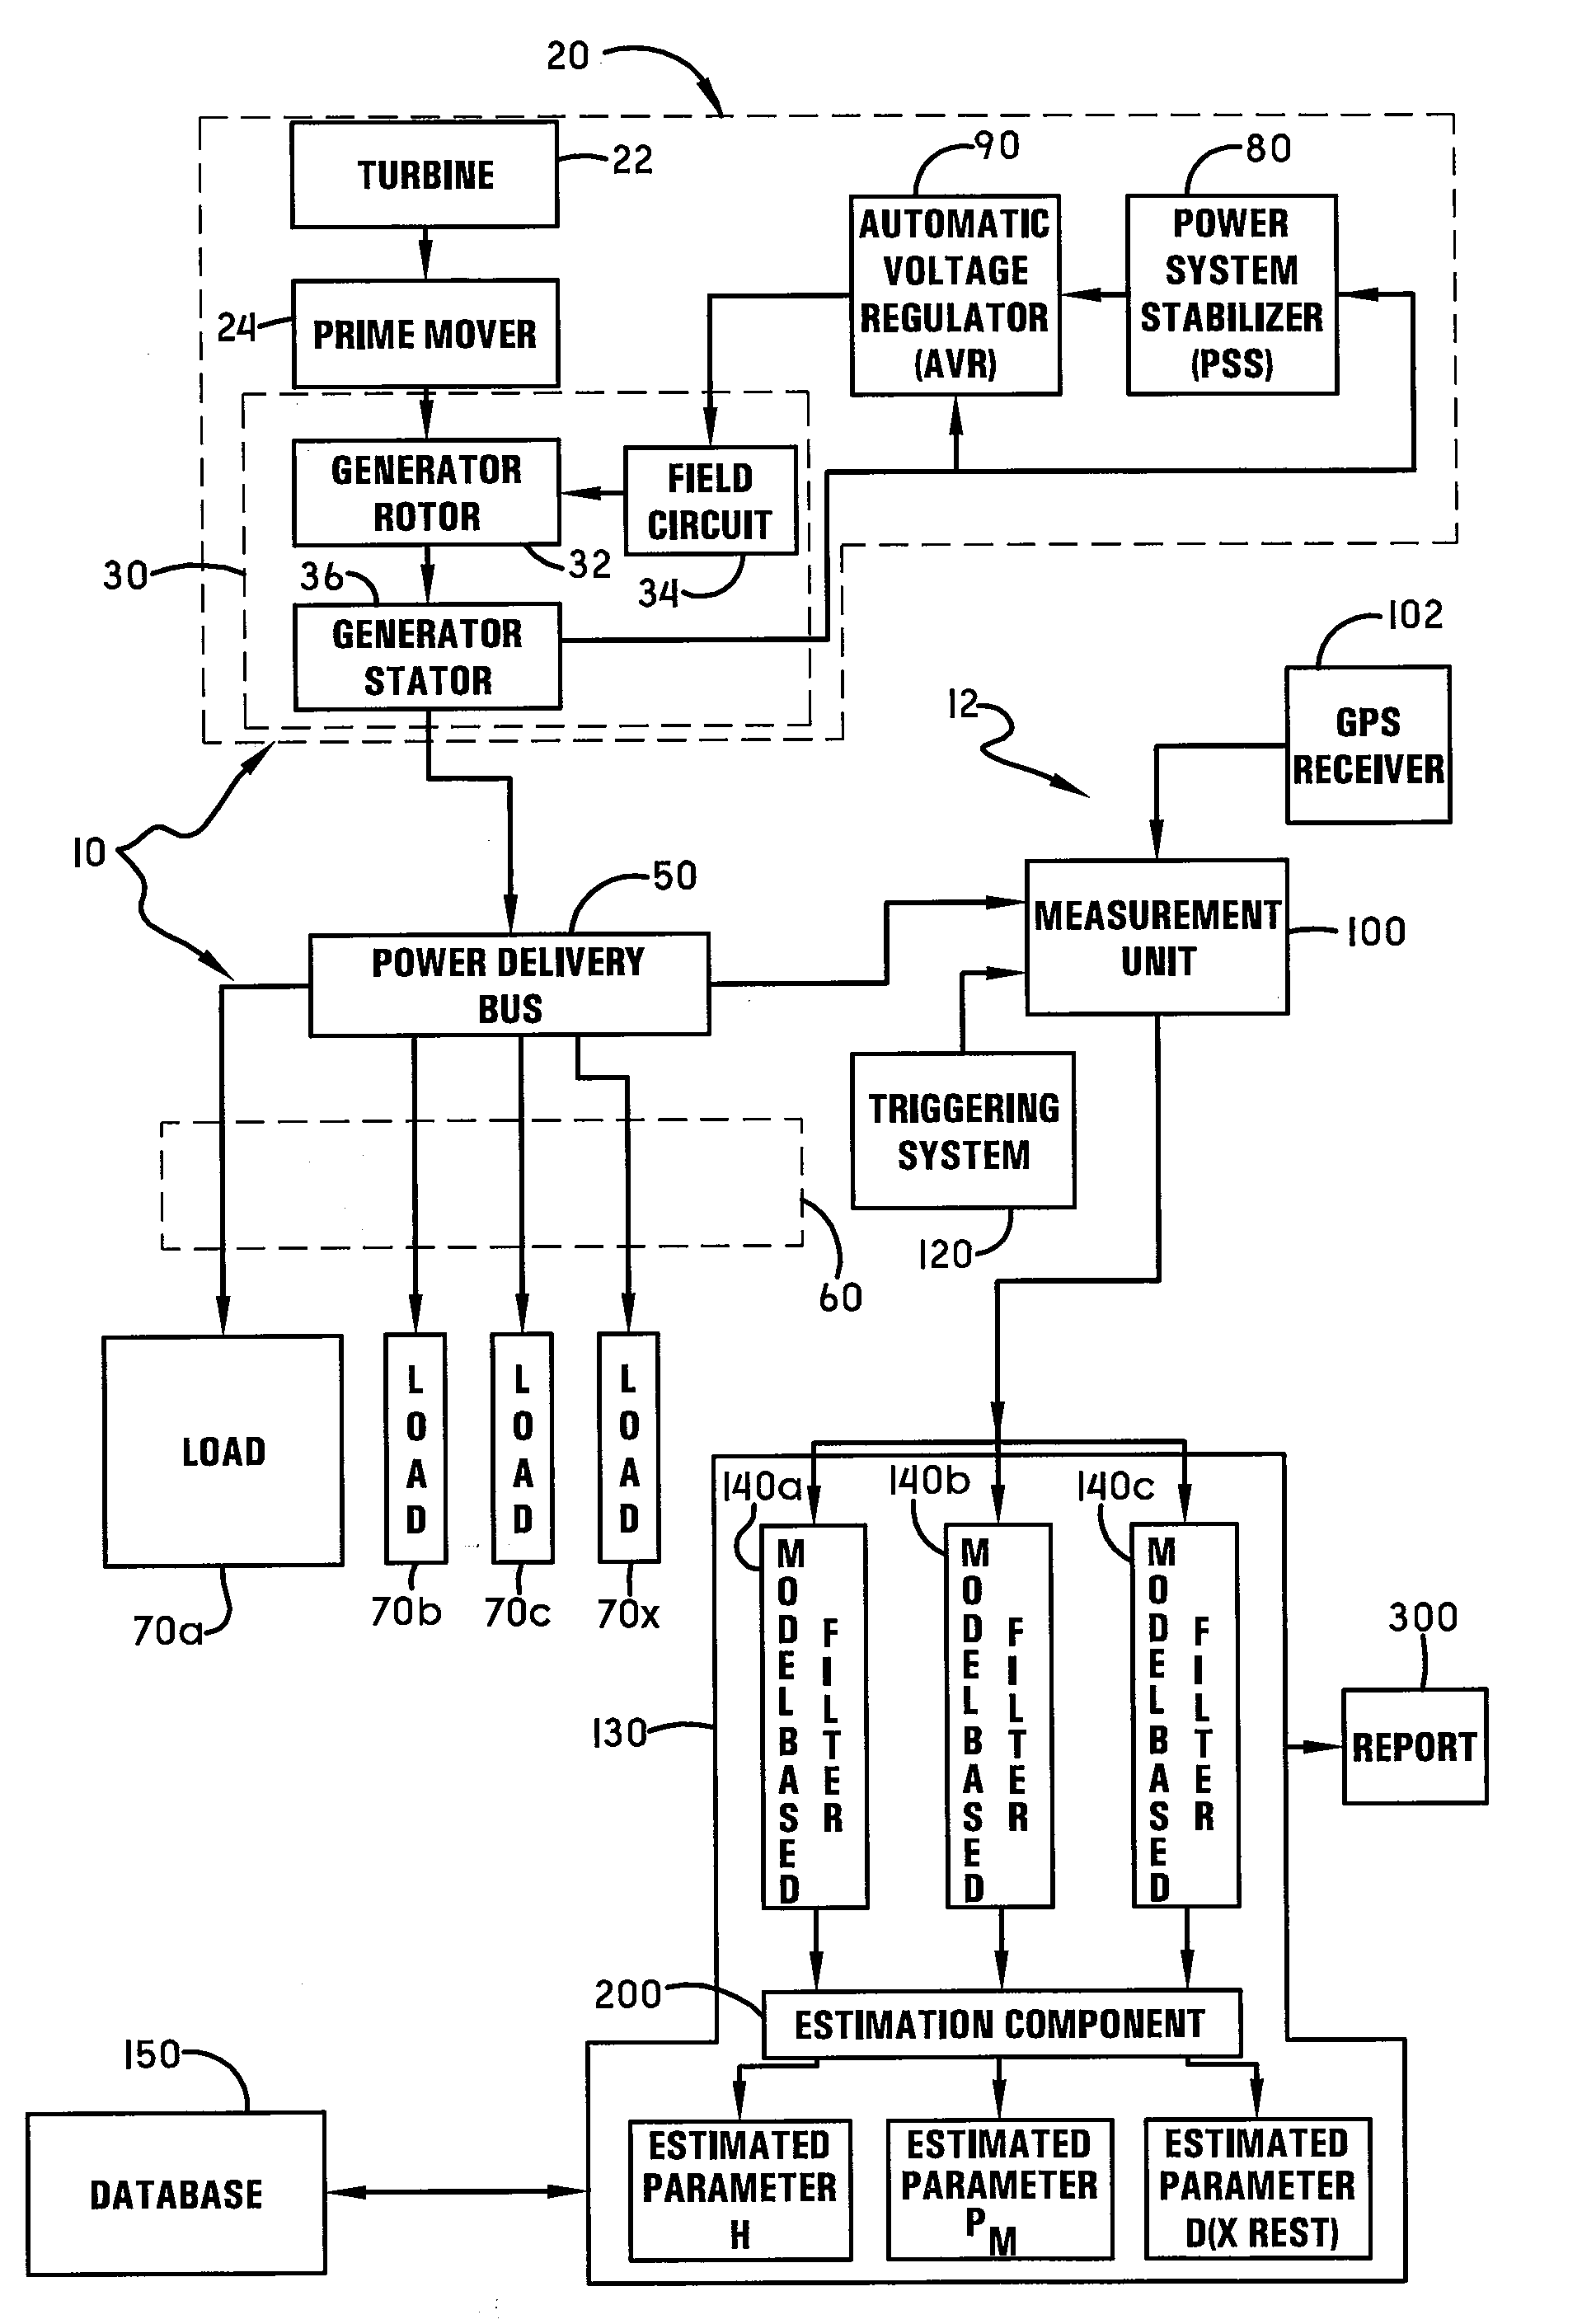 System and method for monitoring power damping compliance of a power generation unit